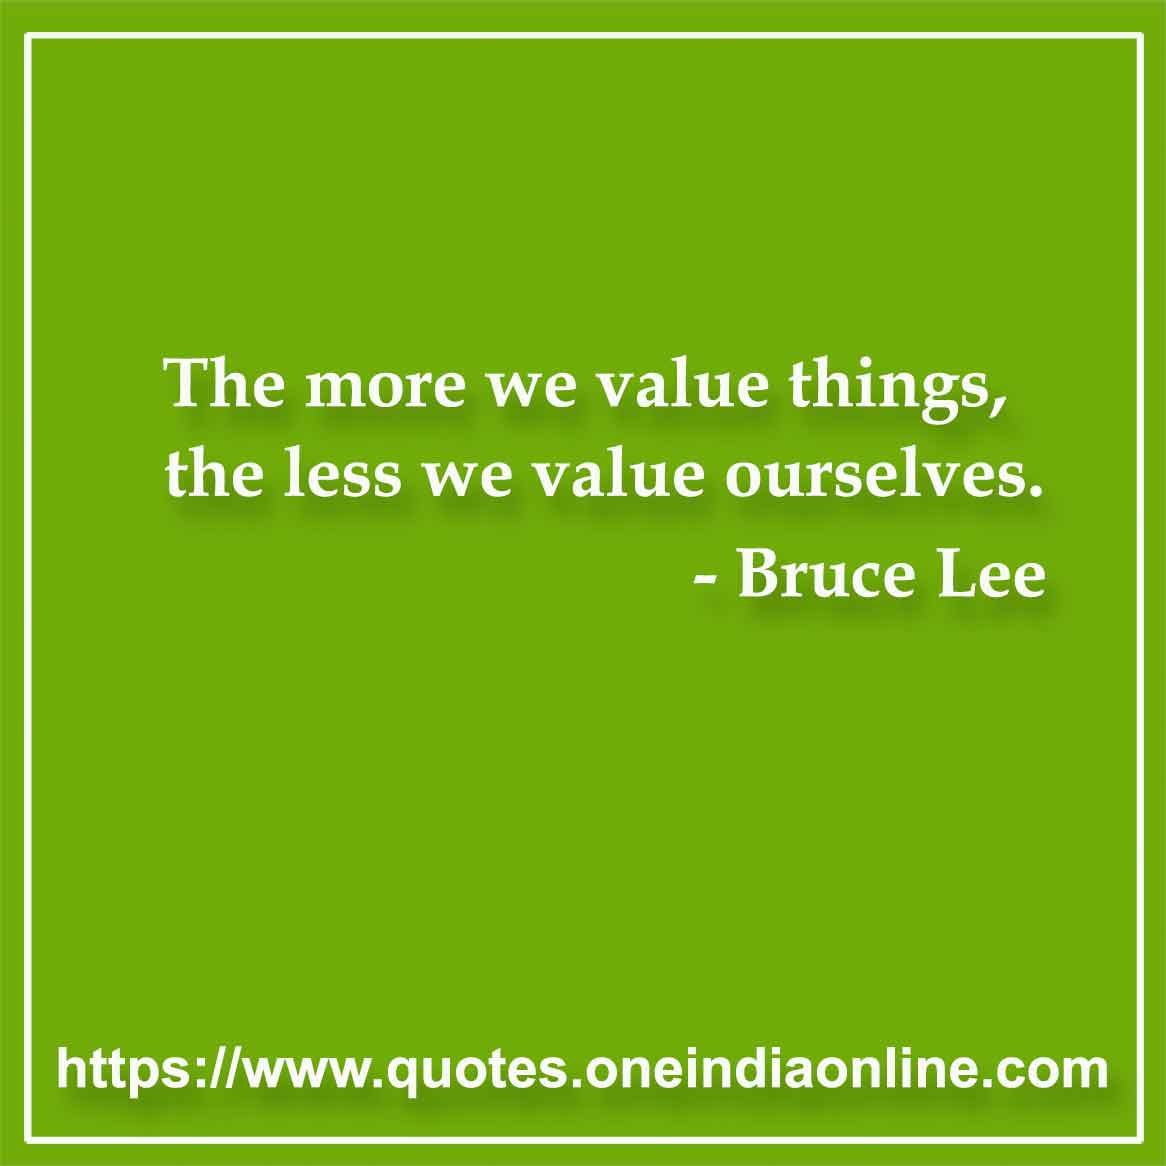 The more we value things, the less we value ourselves.